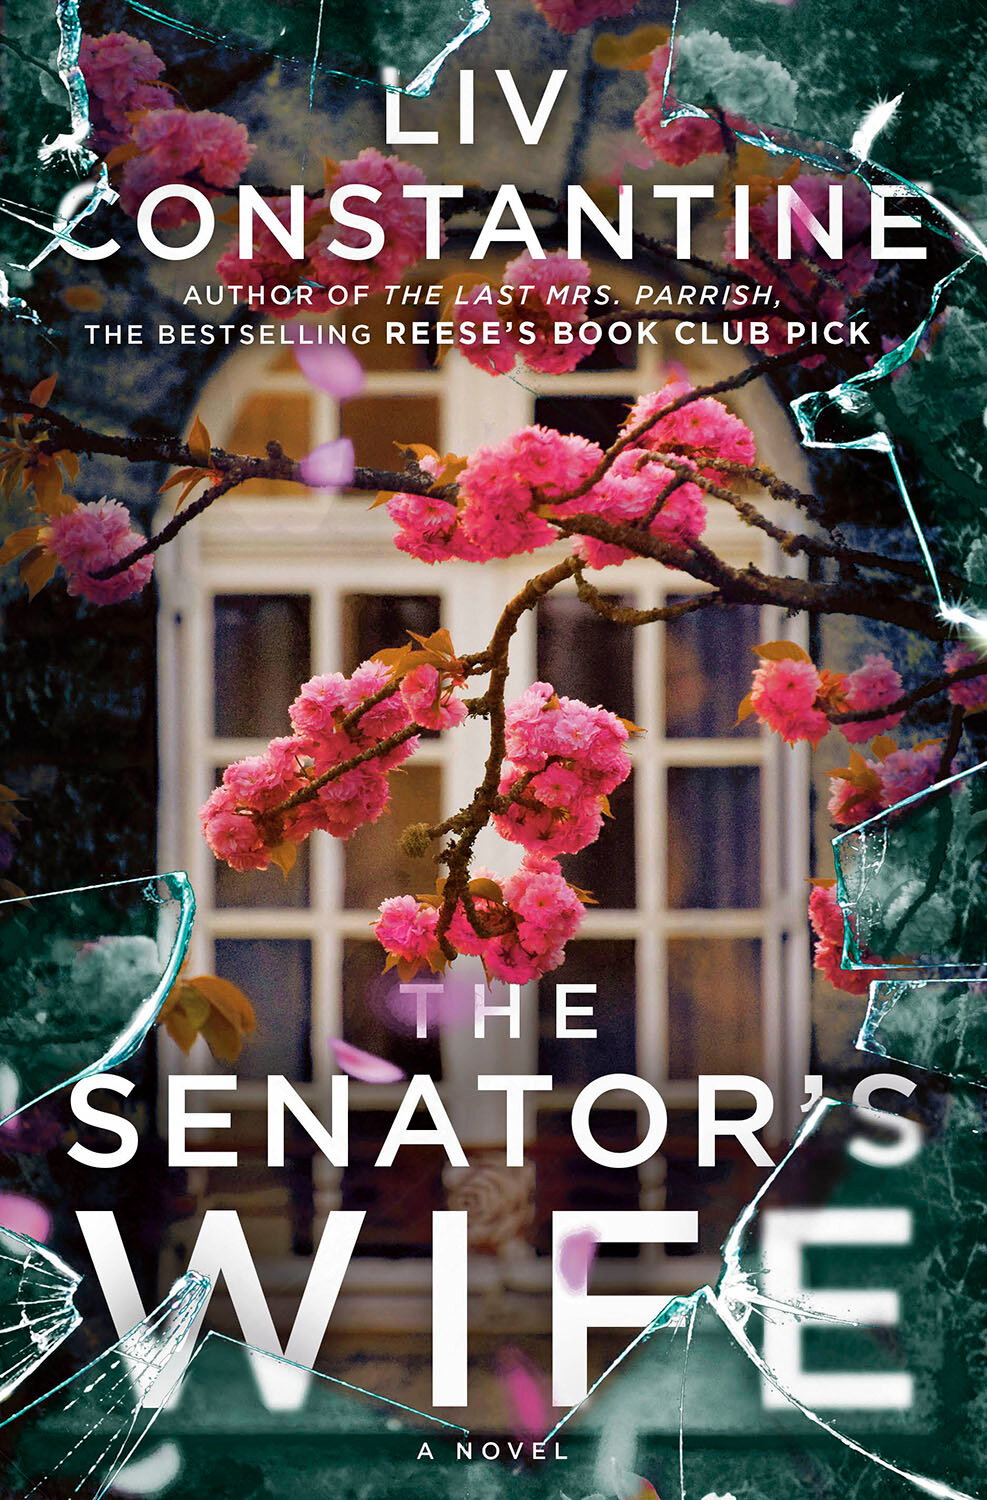 Released in May, “The Senator's Wife” is a psychological suspense tale about a philanthropist who suspects that her seemingly perfect employee is secretly plotting to steal her husband, her reputation and even her life.